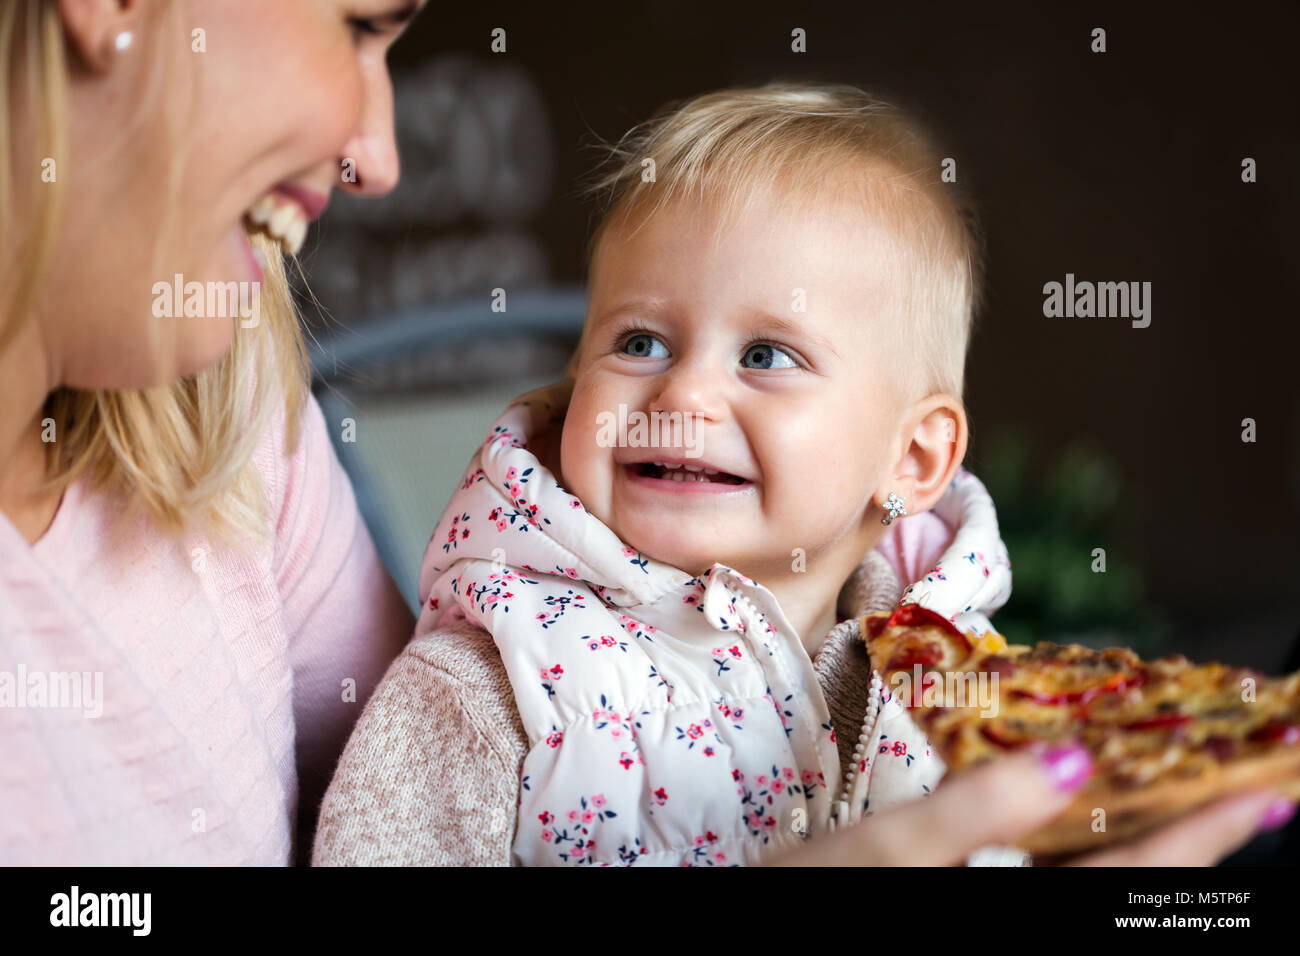 Little girl eats a large slice of pizza from her mother's hands. Children's pizza. Stock Photo